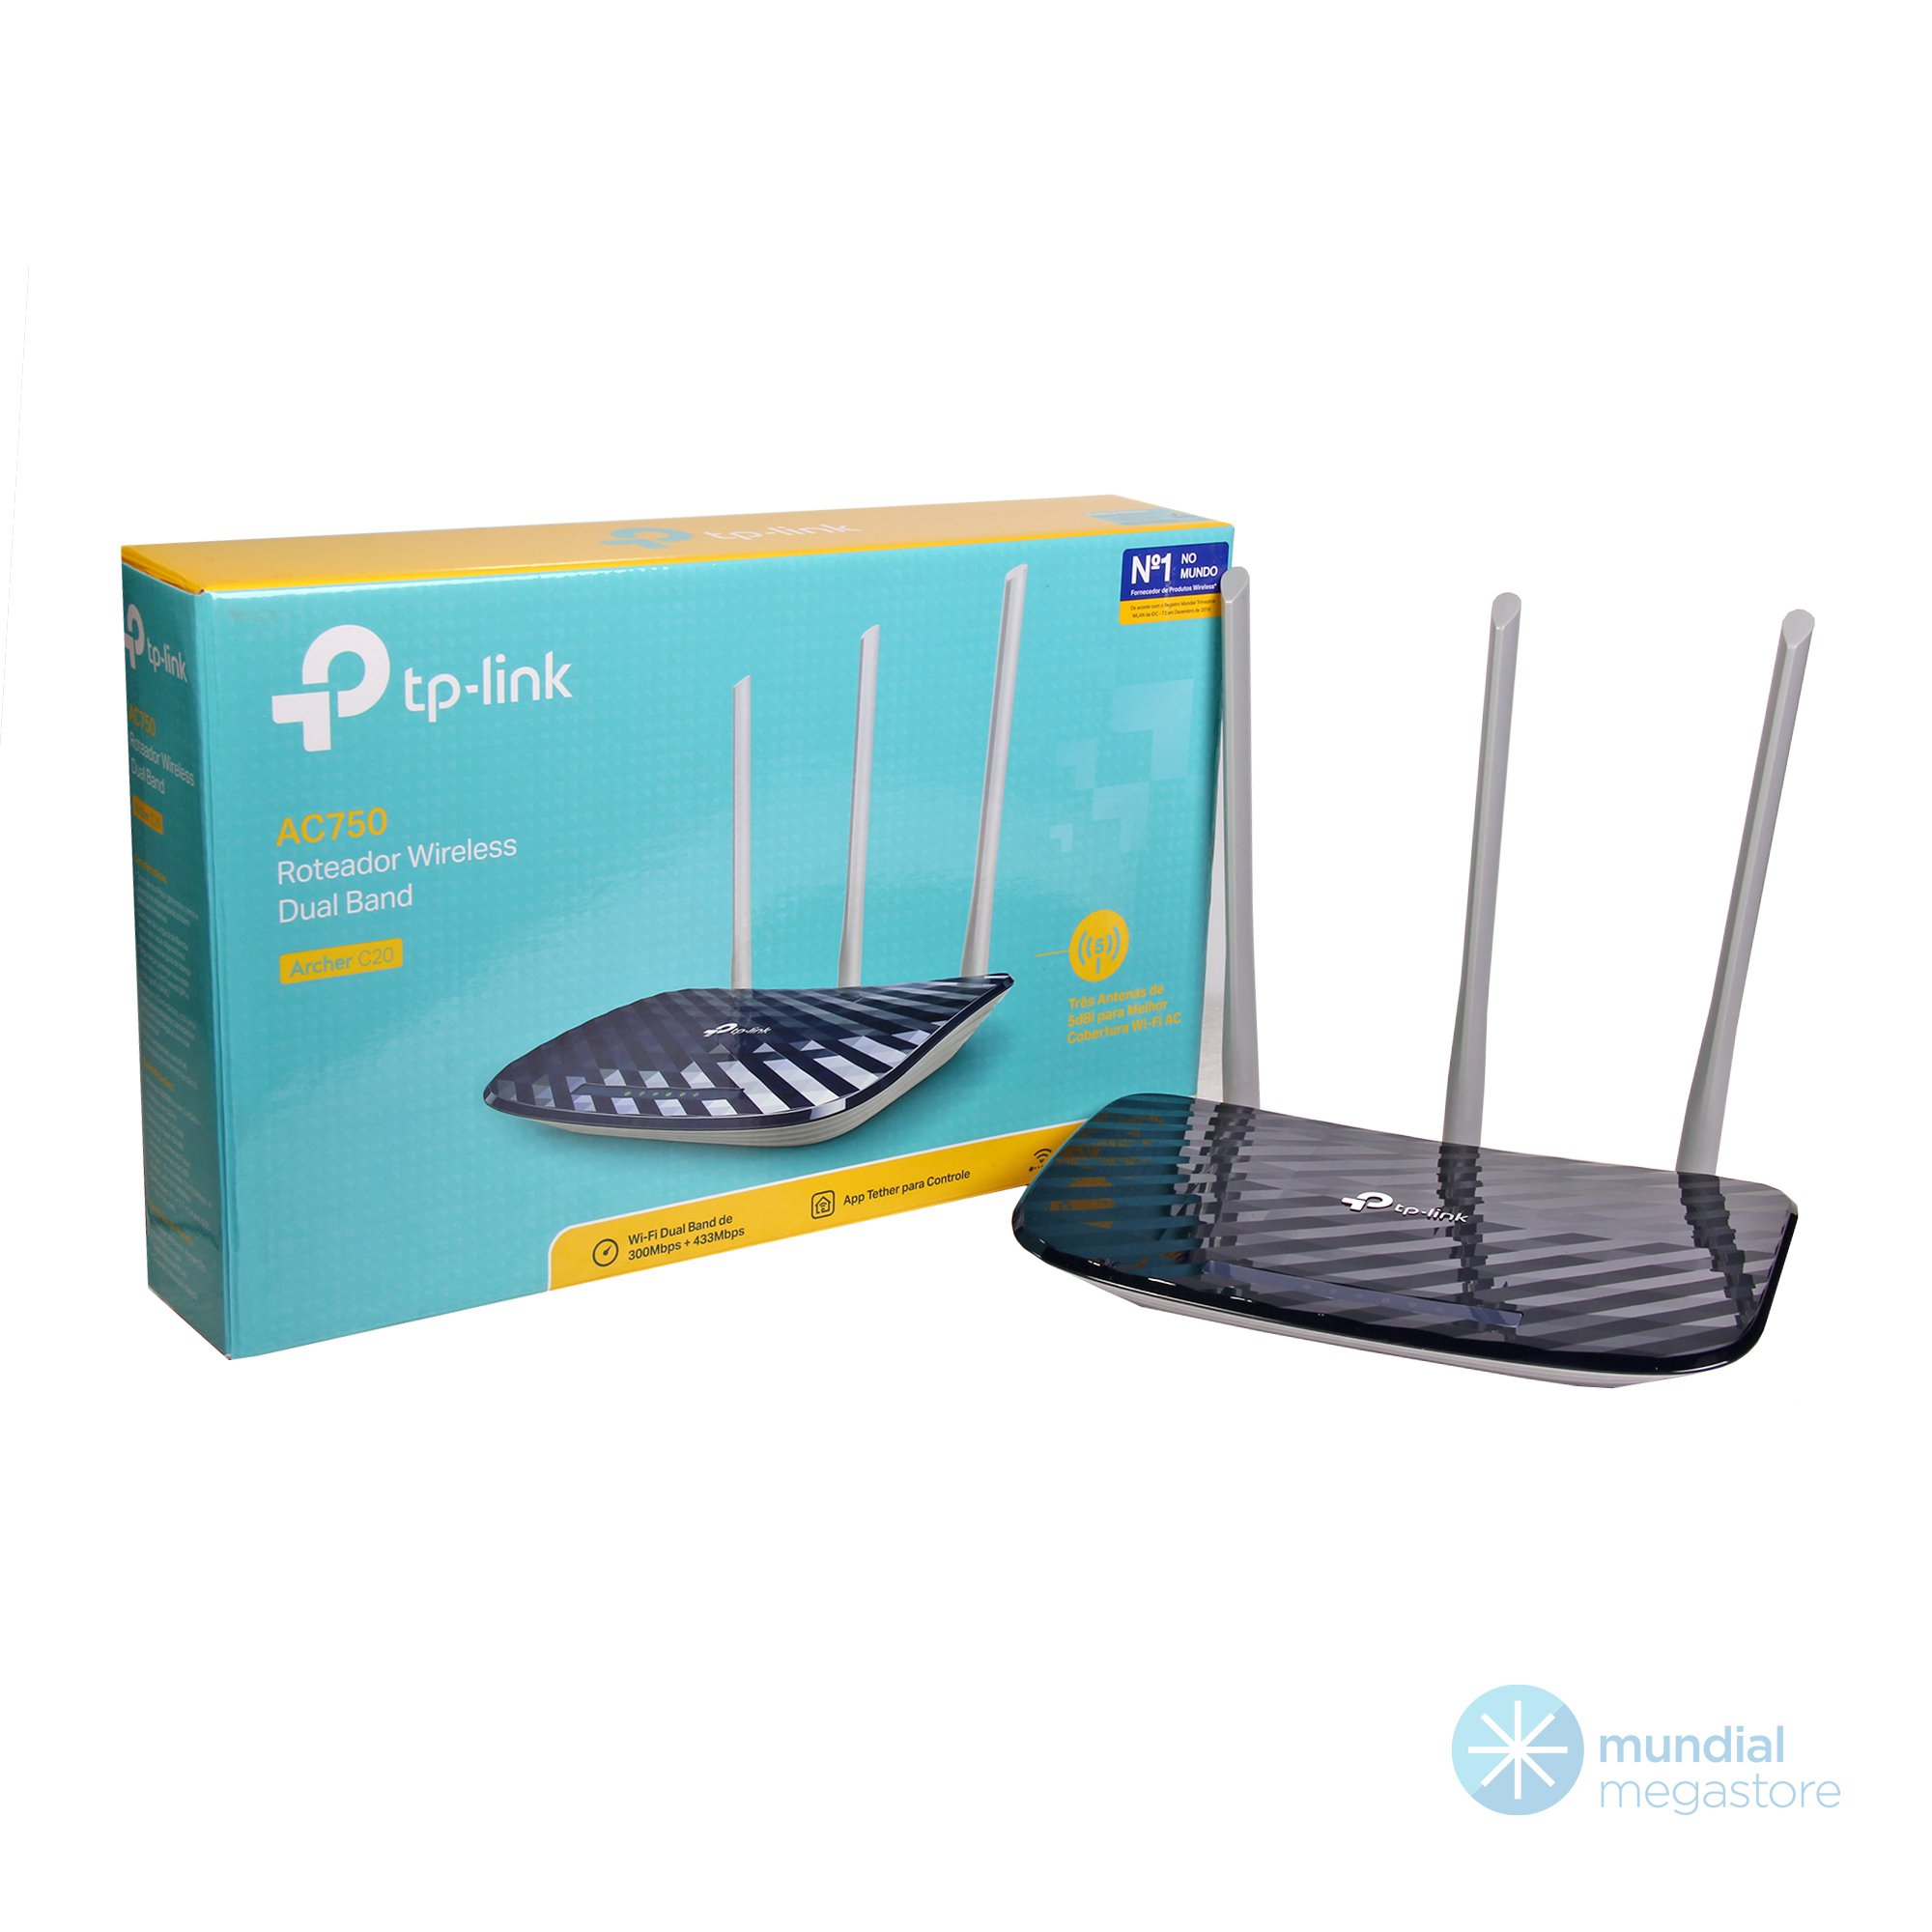 wireless roteador tp link archer c20 ac 750 24 750mbps 29937 2000 196056